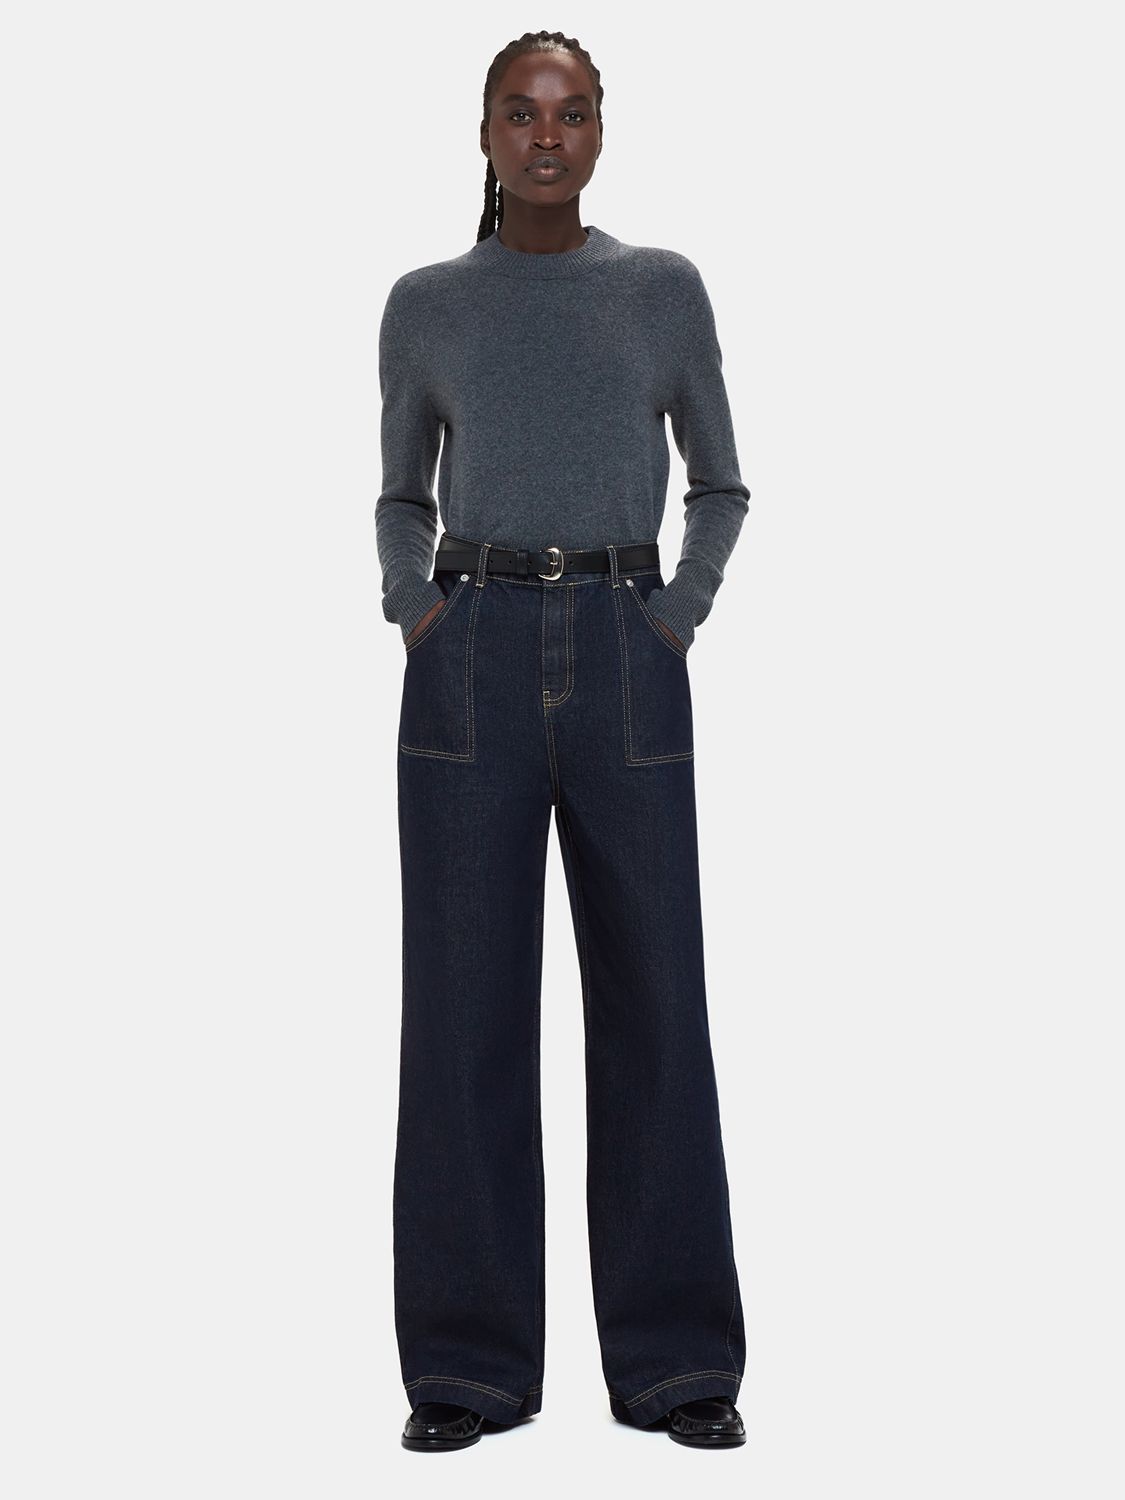 Whistles Marie Elasticated Waist Jeans, Washed Black at John Lewis ...